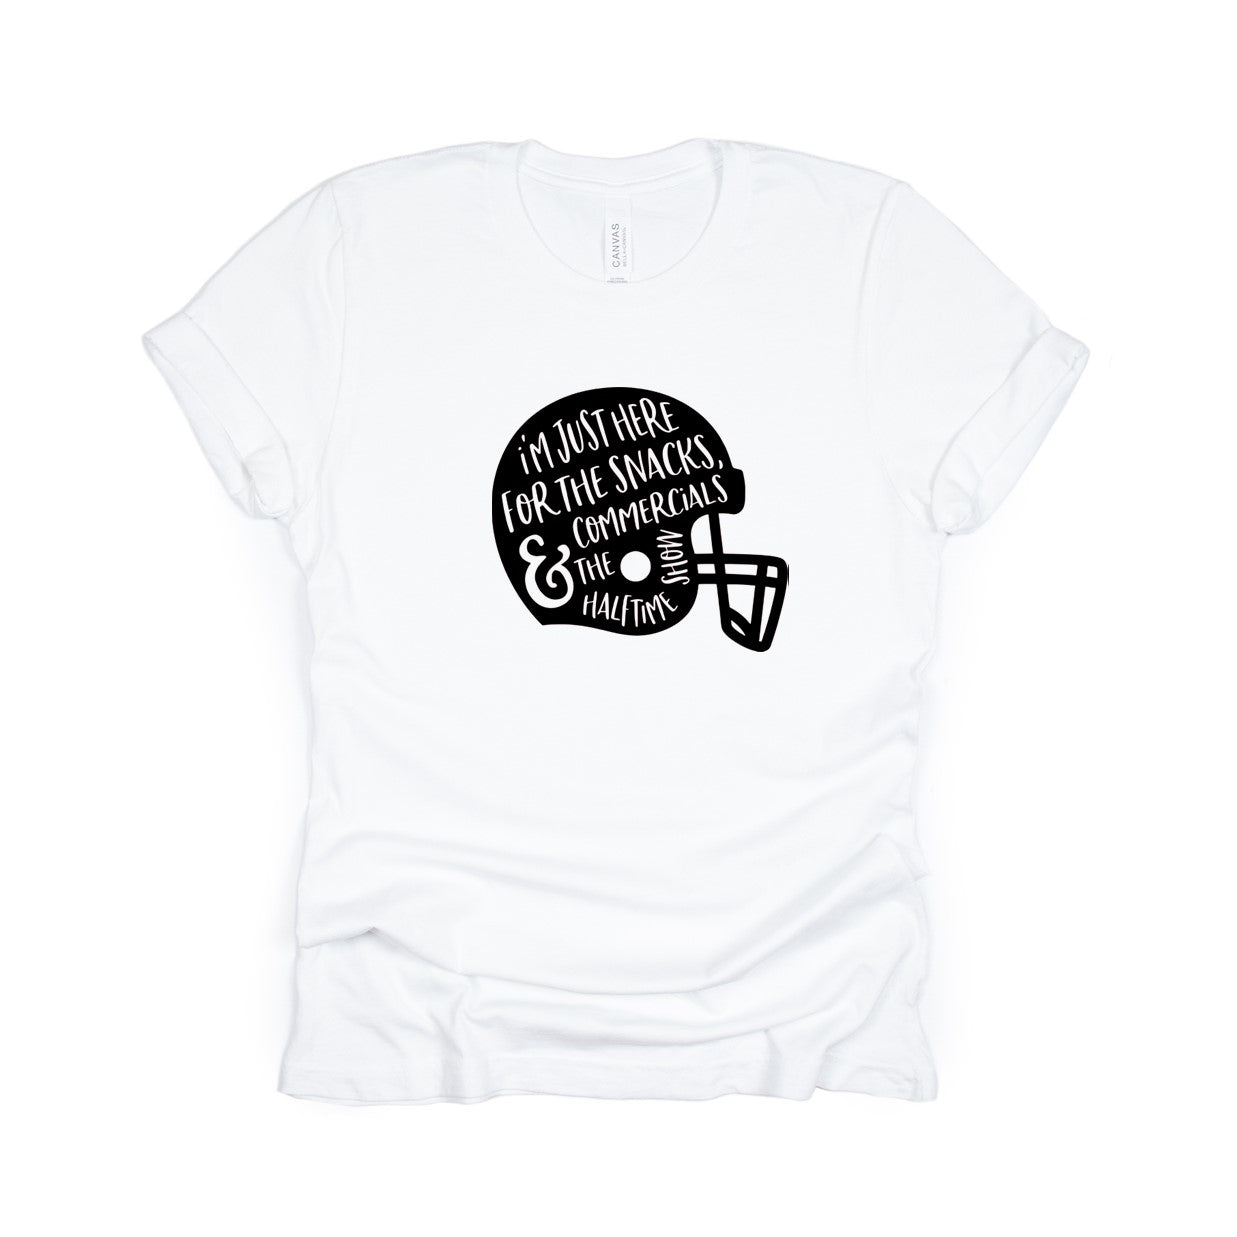 I'm just here for the snacks, commercials and halftime show - tee or sweatshirt